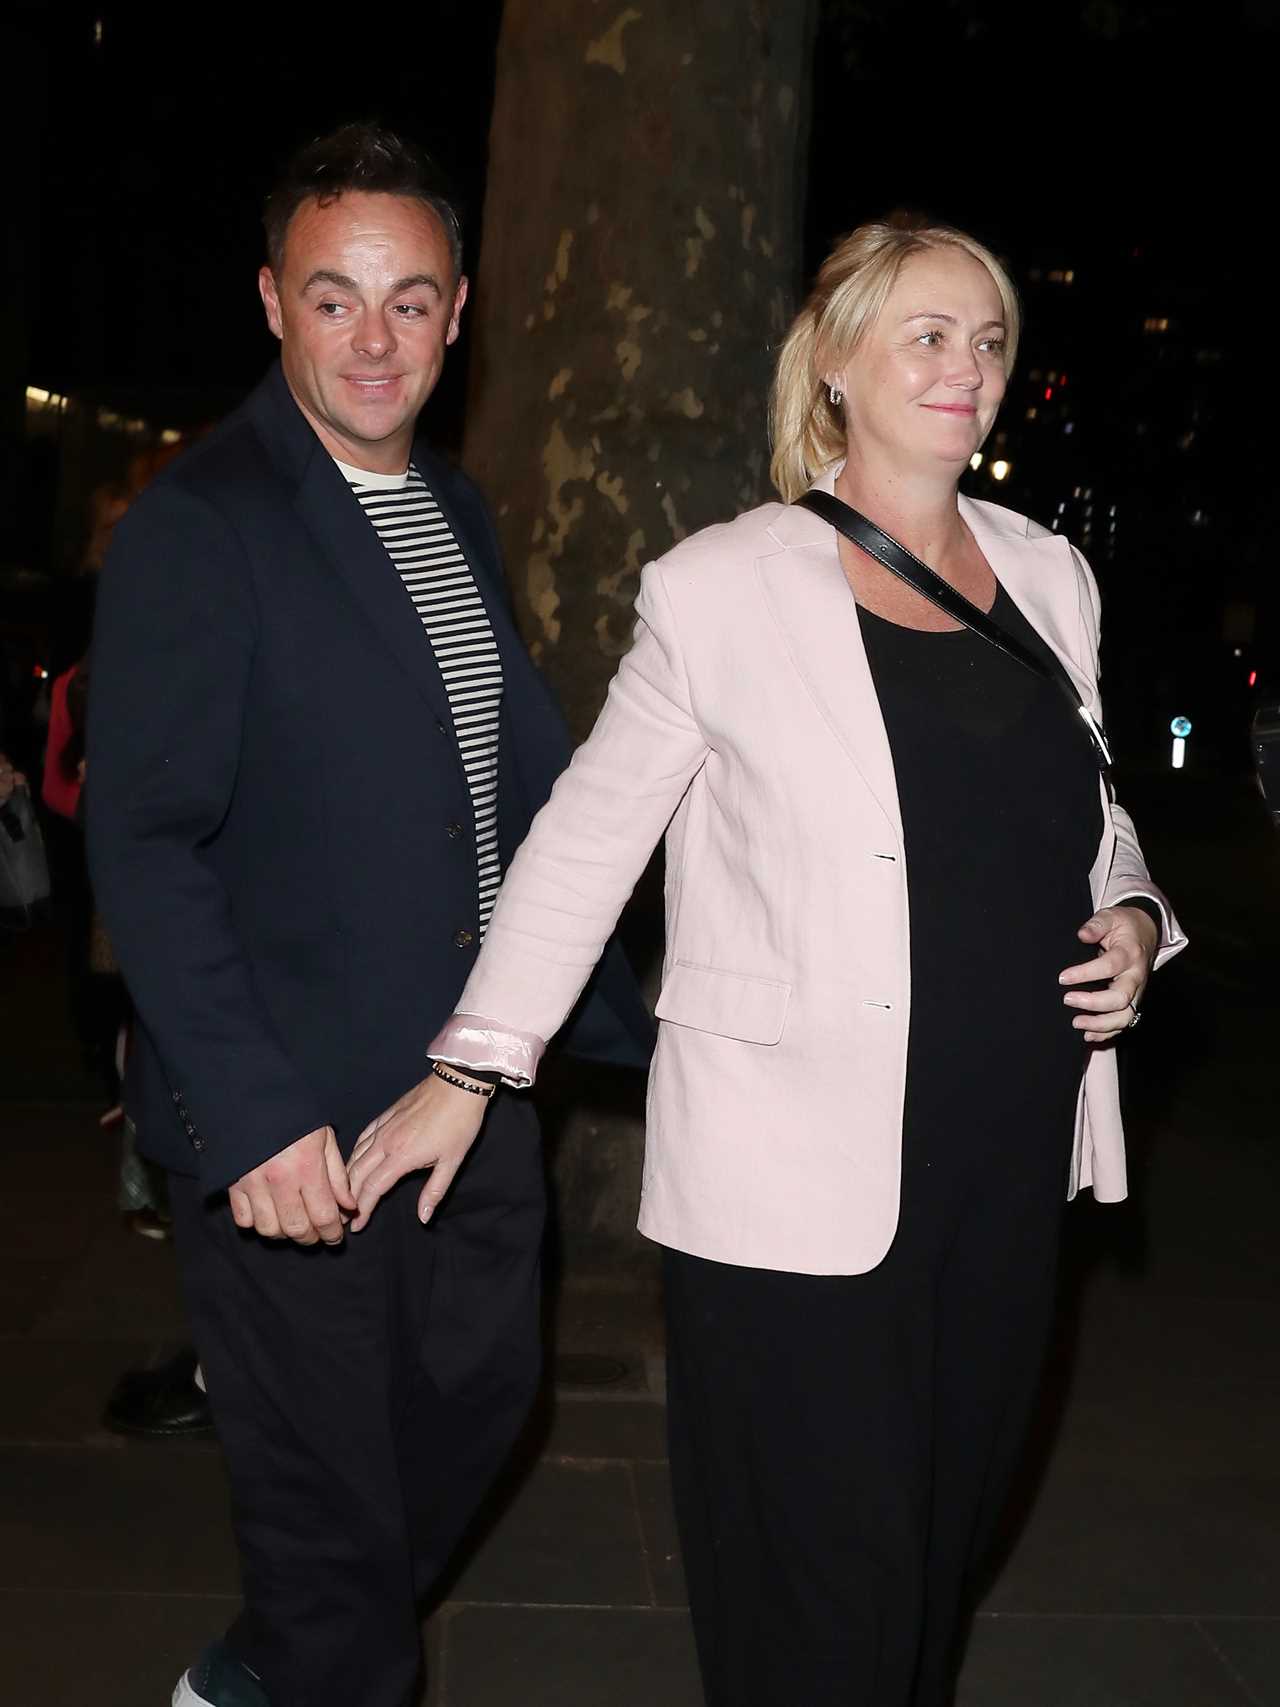 Ant McPartlin's Wife Anne-Marie Shows Off Baby Bump on Date Night to Watch Cara Delevingne